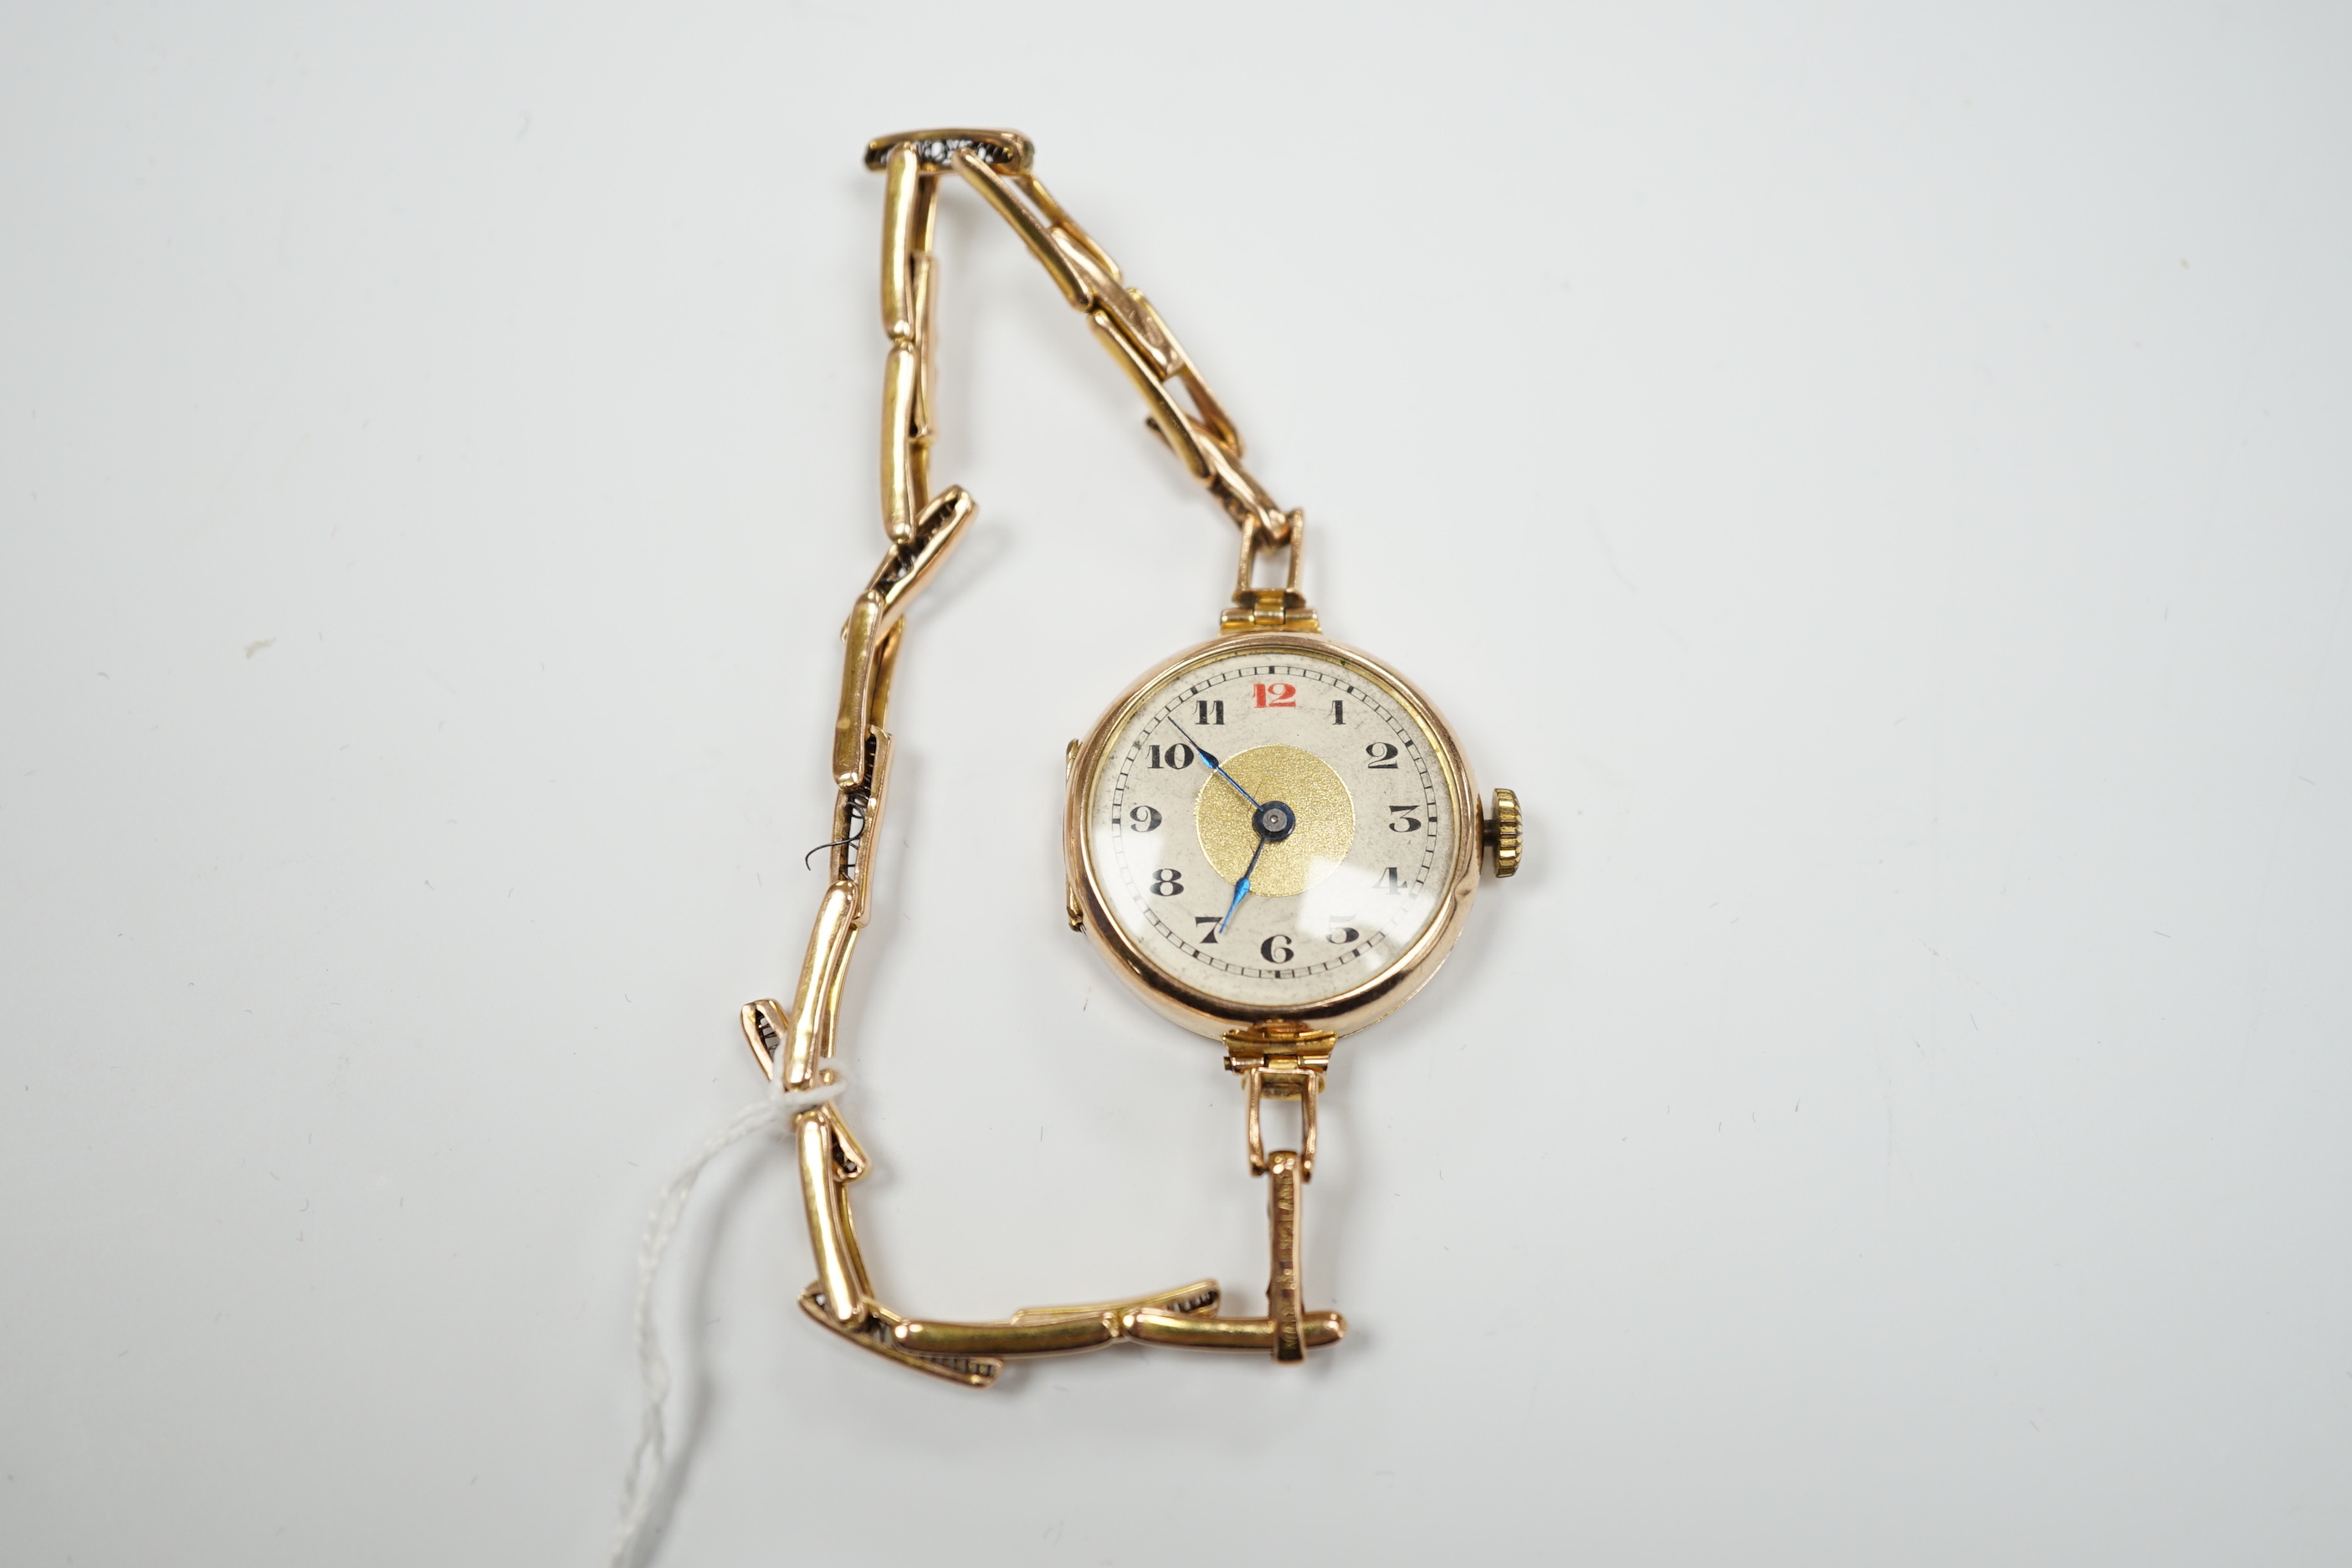 An early 20th century 9ct gold manual wind wrist watch, on a 9ct expanding bracelet, case diameter 25mm, gross weight 14.9 grams.